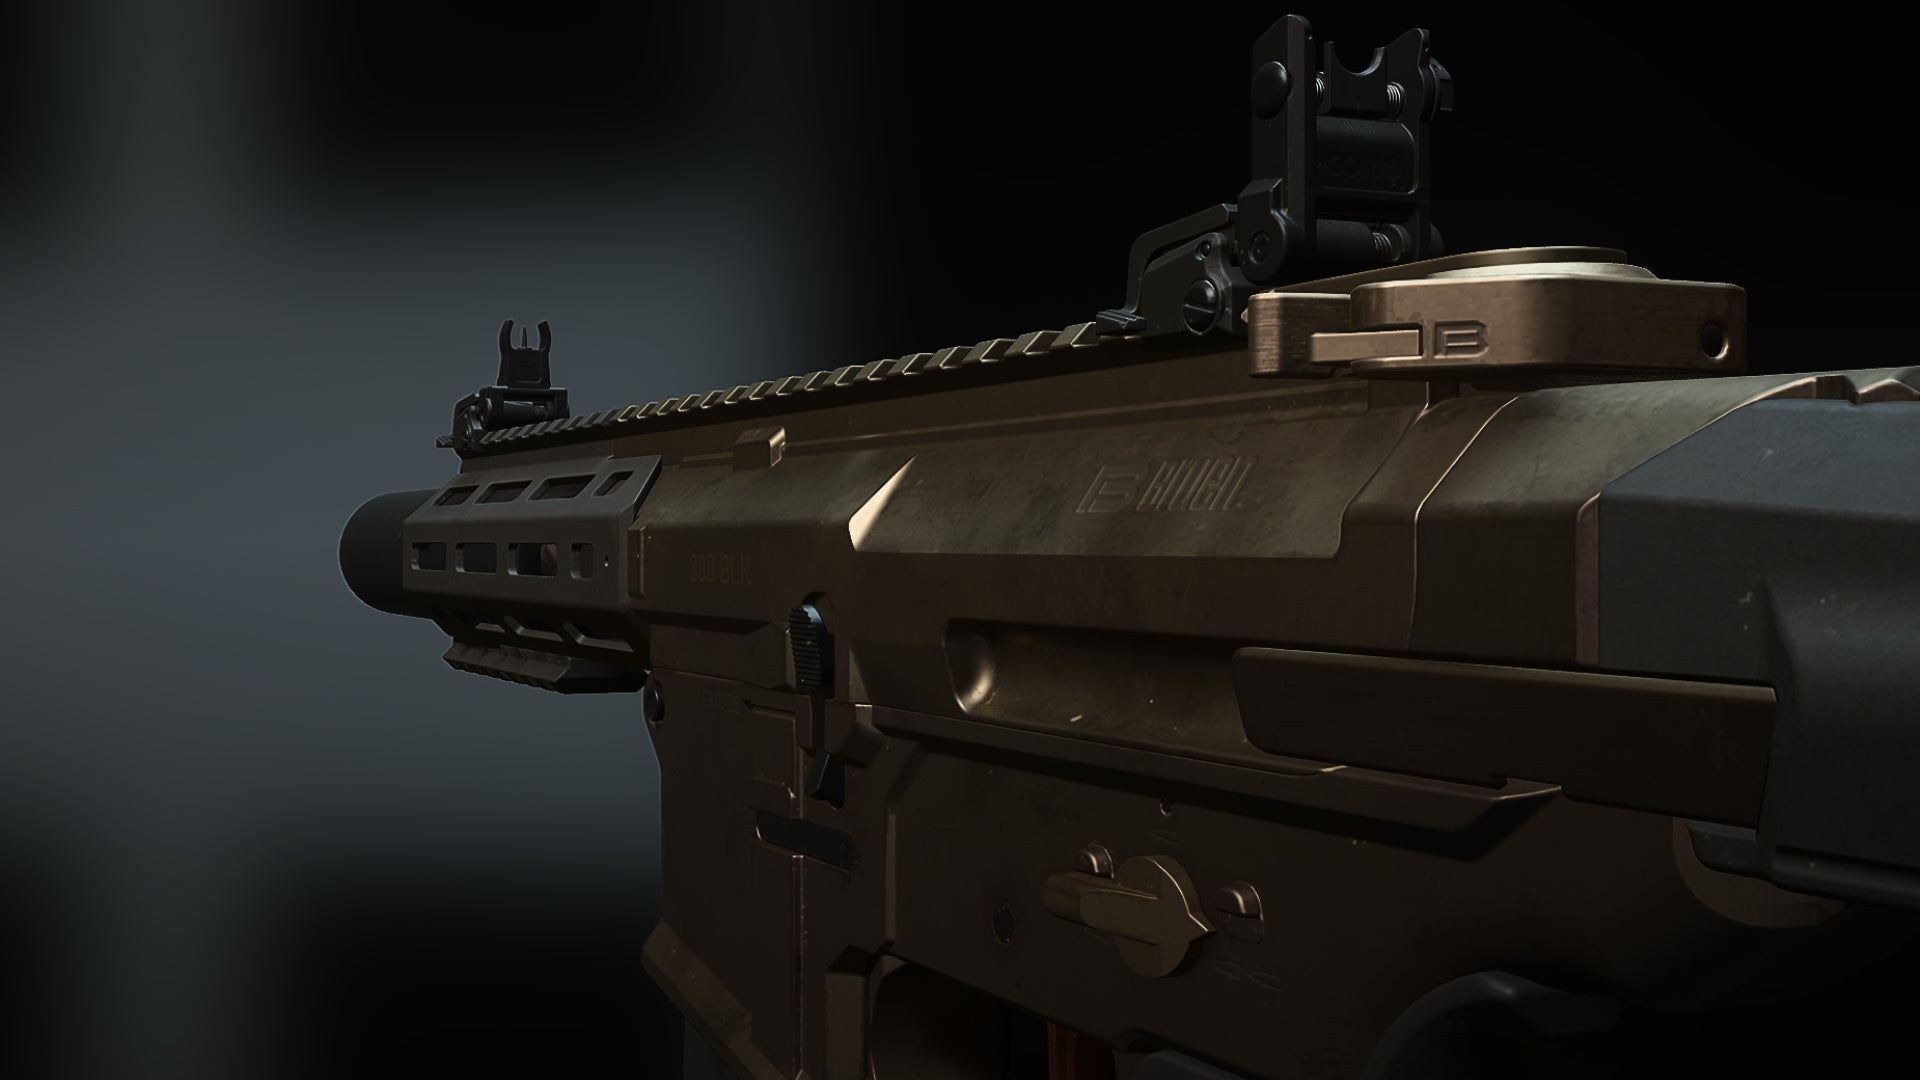 A close-up of the Chimera Assault Rifle, a weapon in Warzone 2.0.